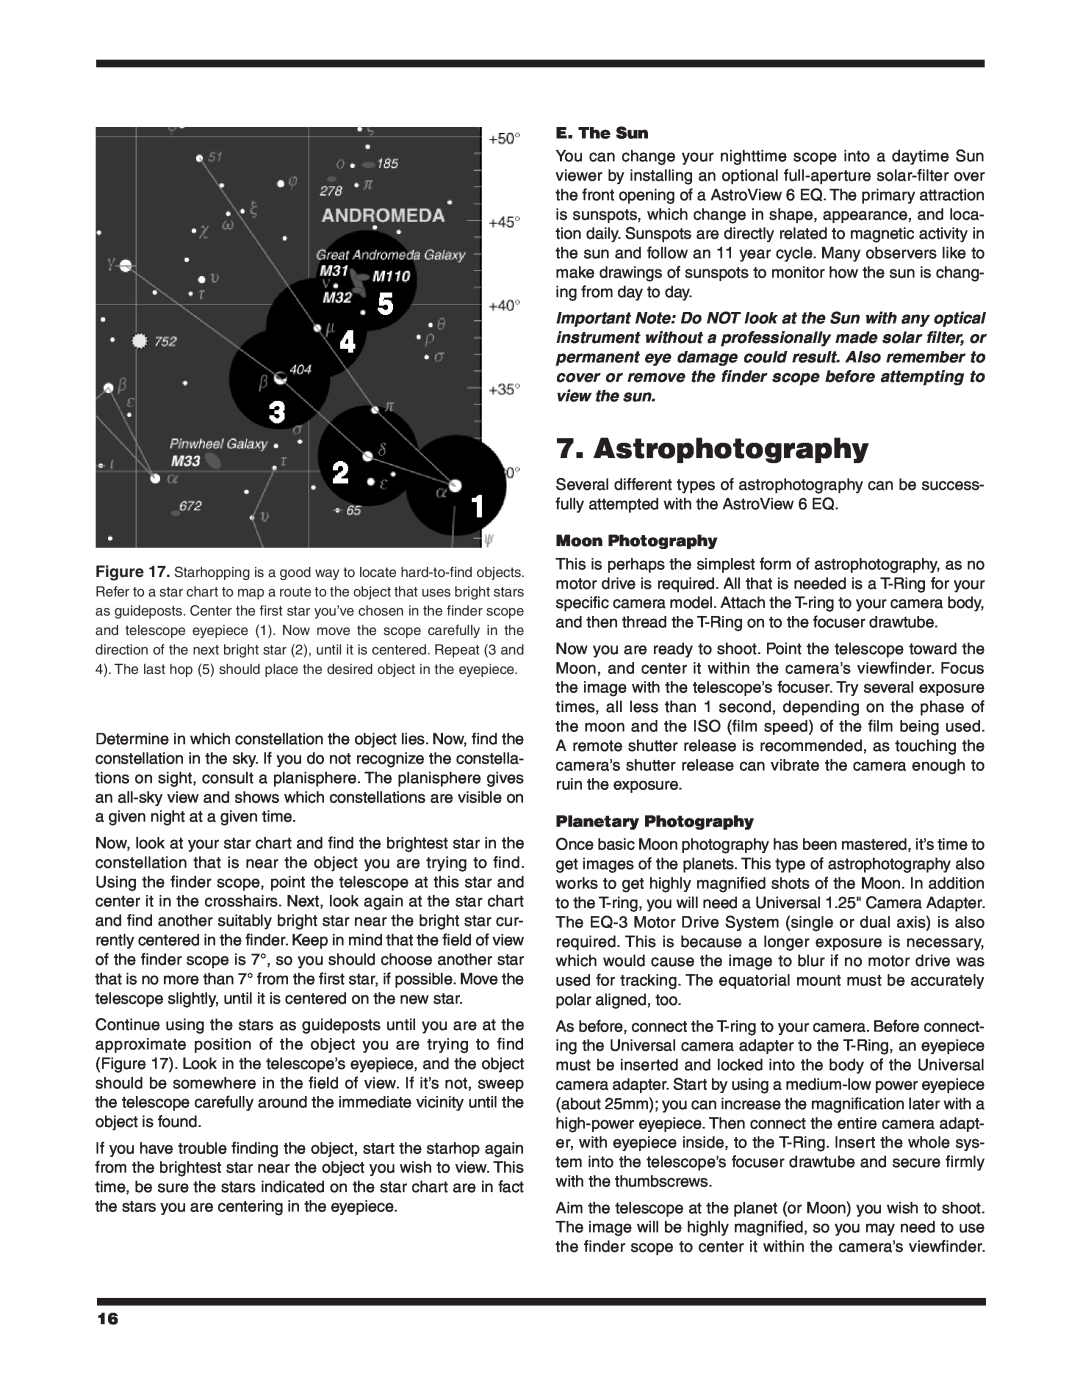 Orion 9827 instruction manual Astrophotography, E. The Sun, Moon Photography, Planetary Photography 